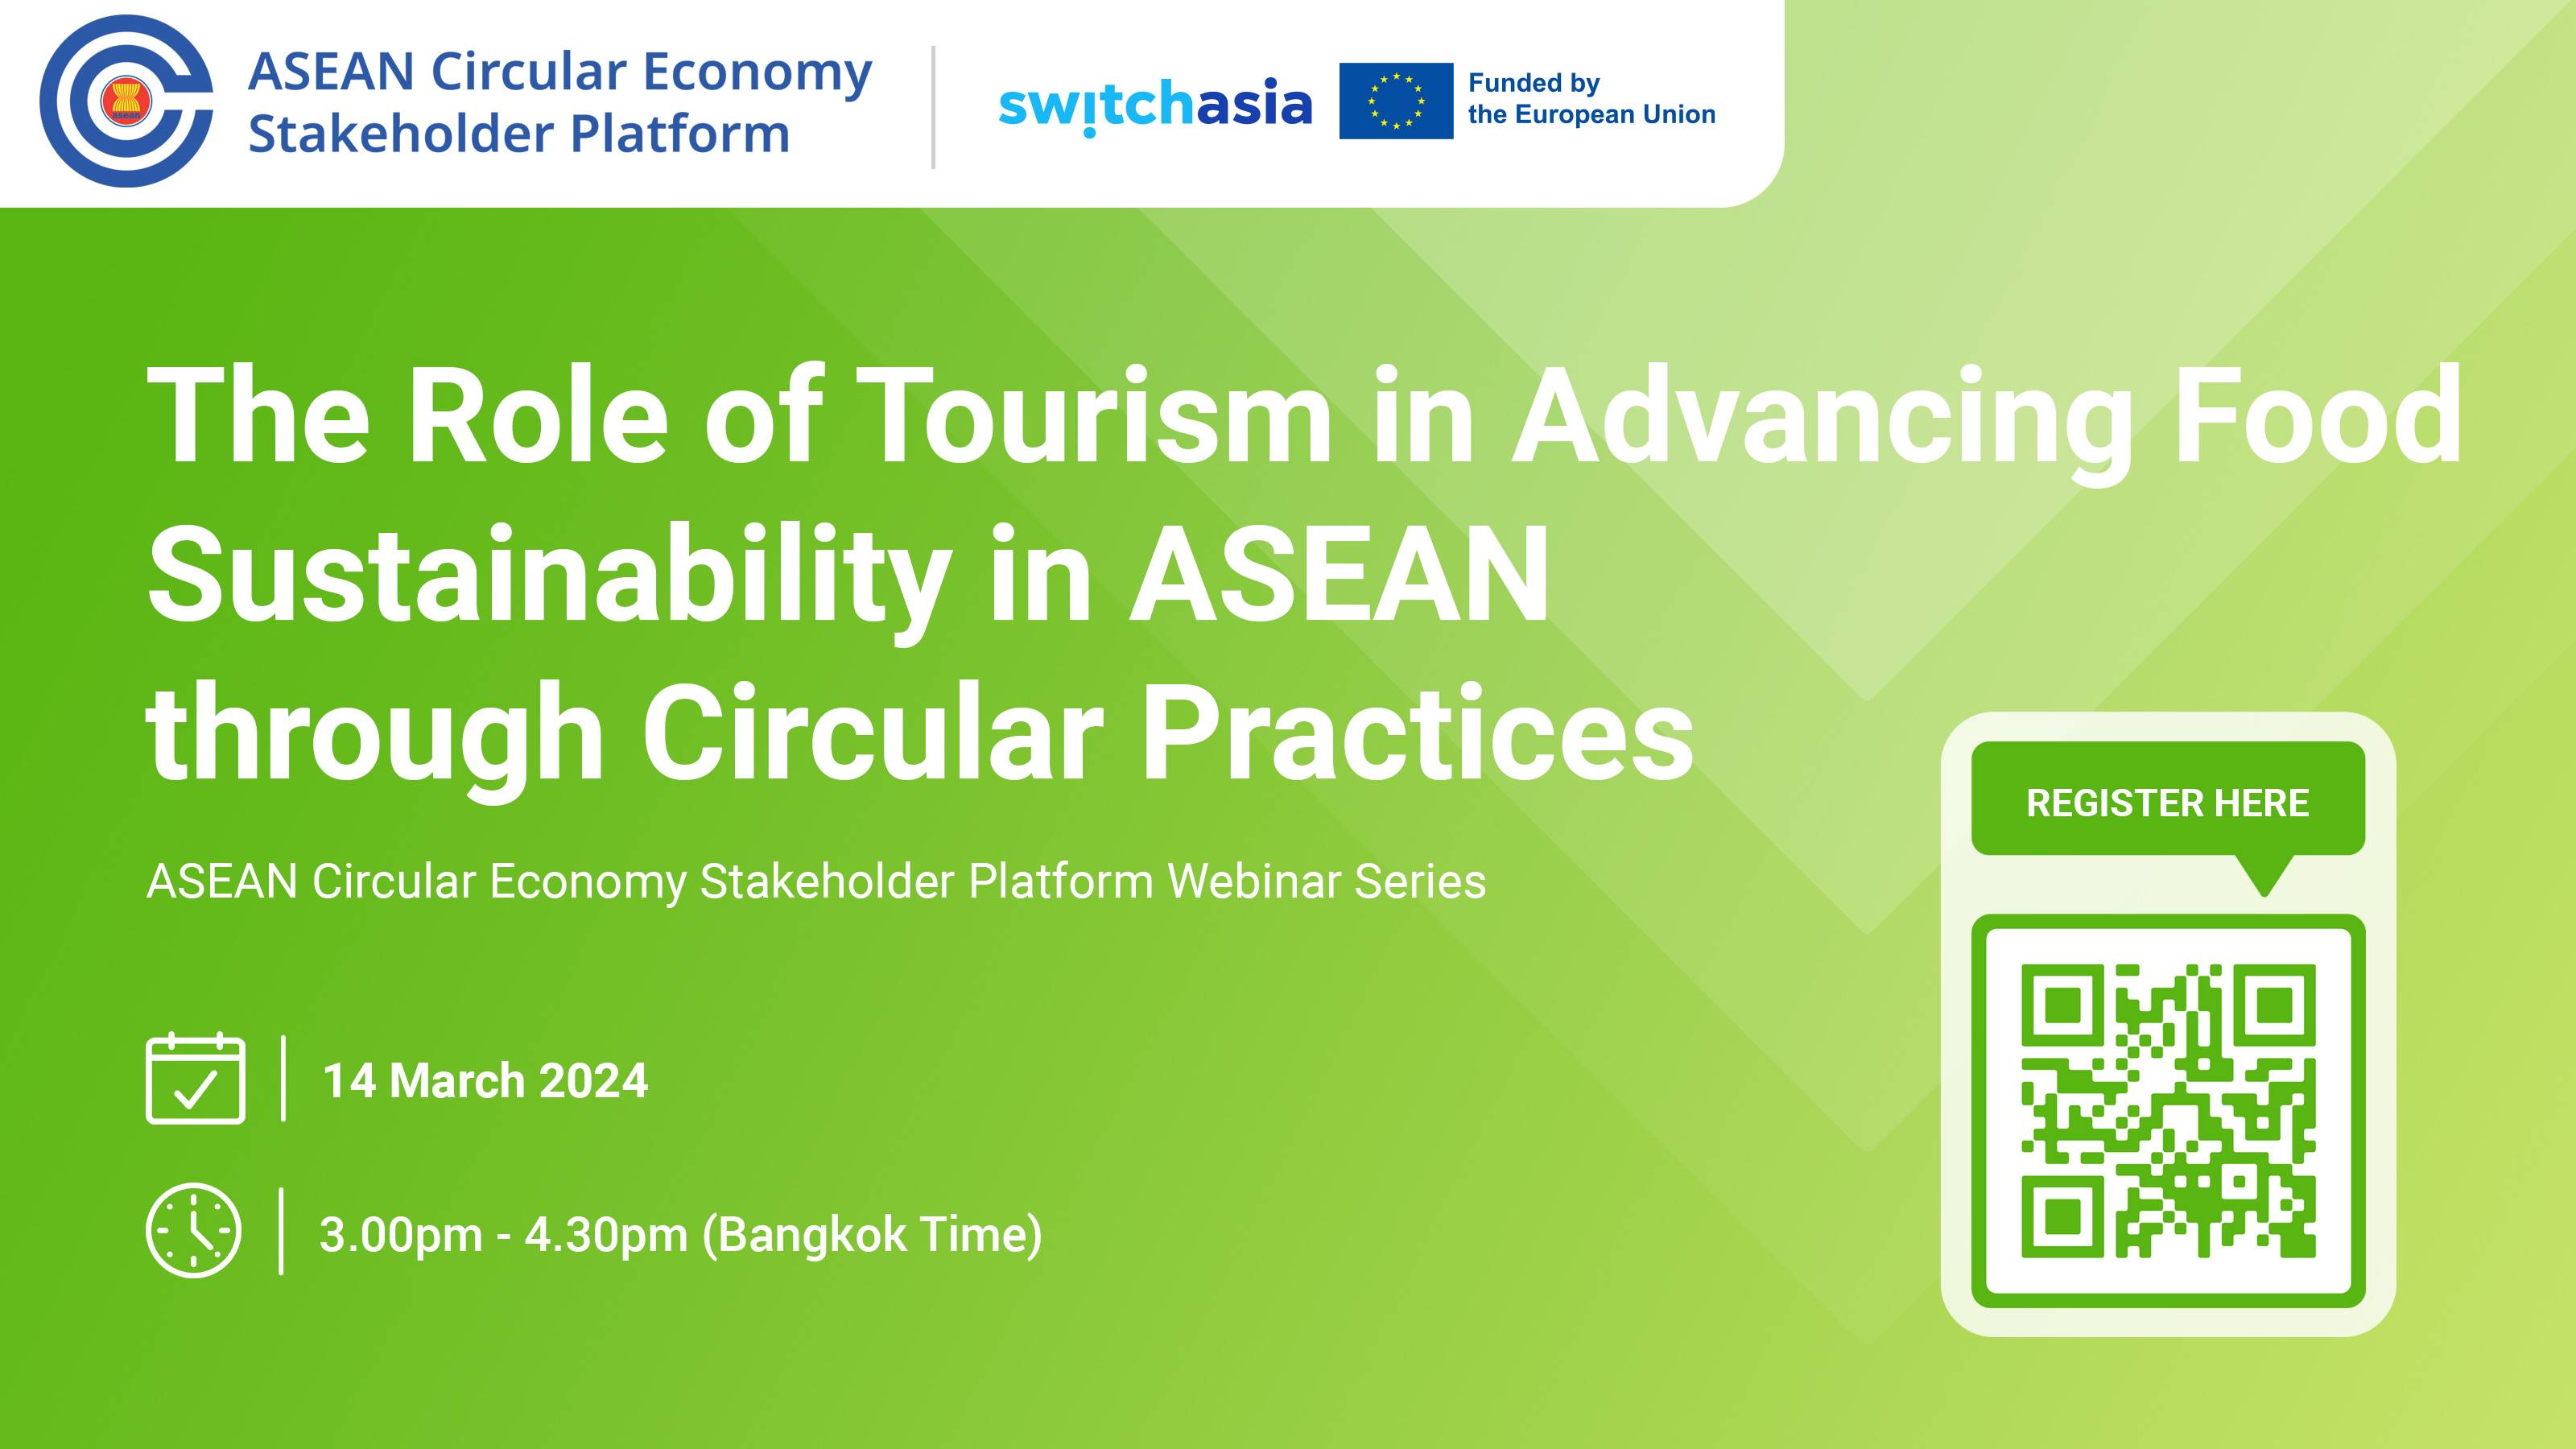 The Role of Tourism in Advancing Food Sustainability in ASEAN through Circular Practices